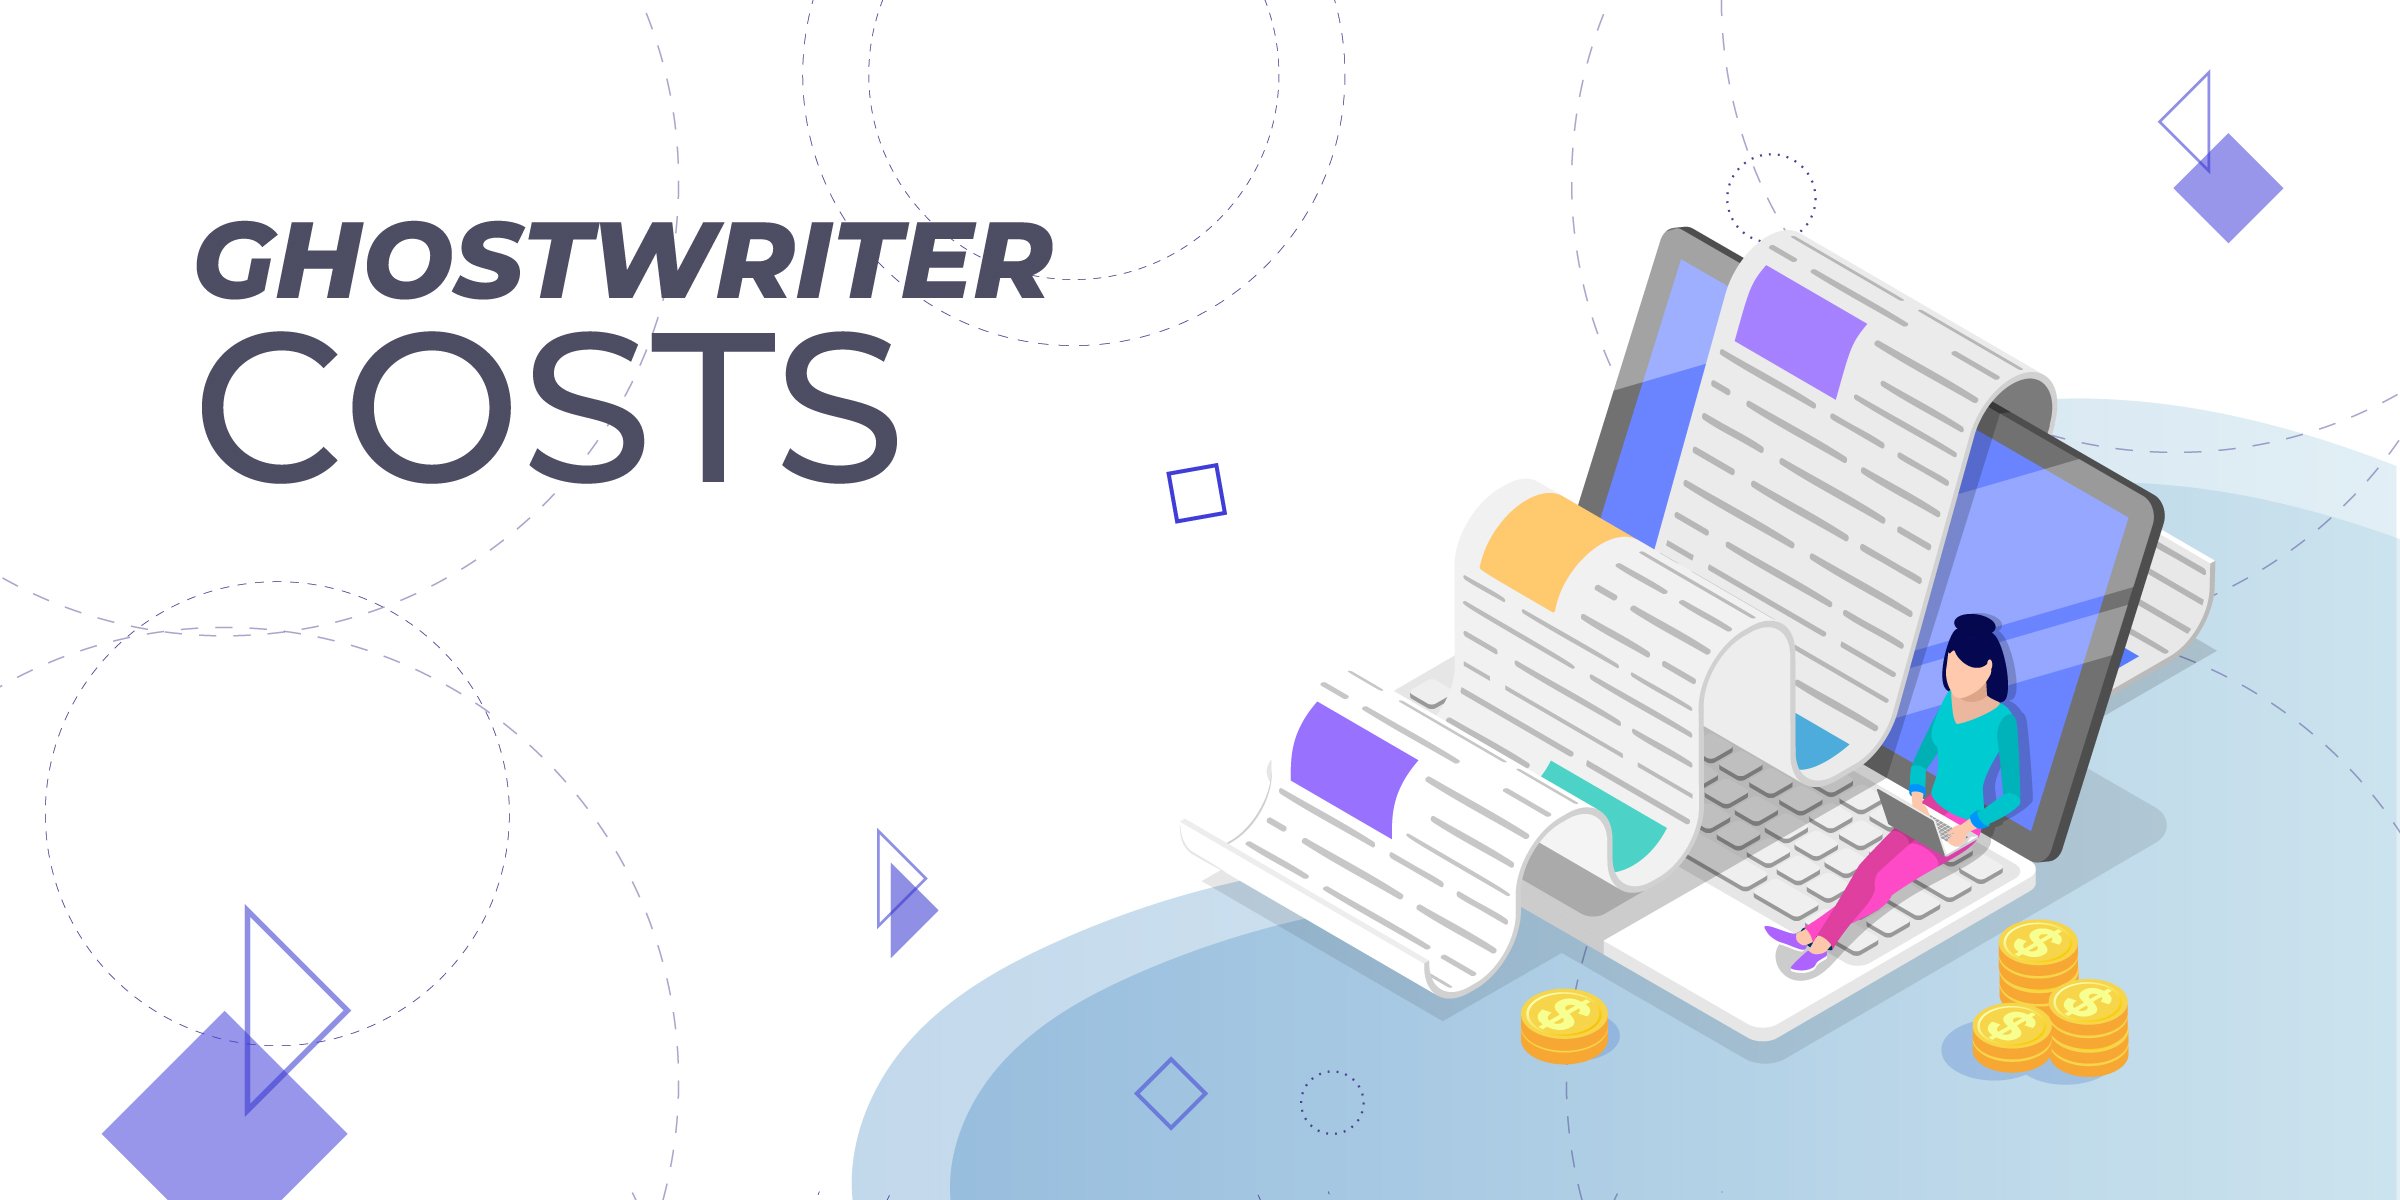 How Much Does a Ghostwriter Cost?